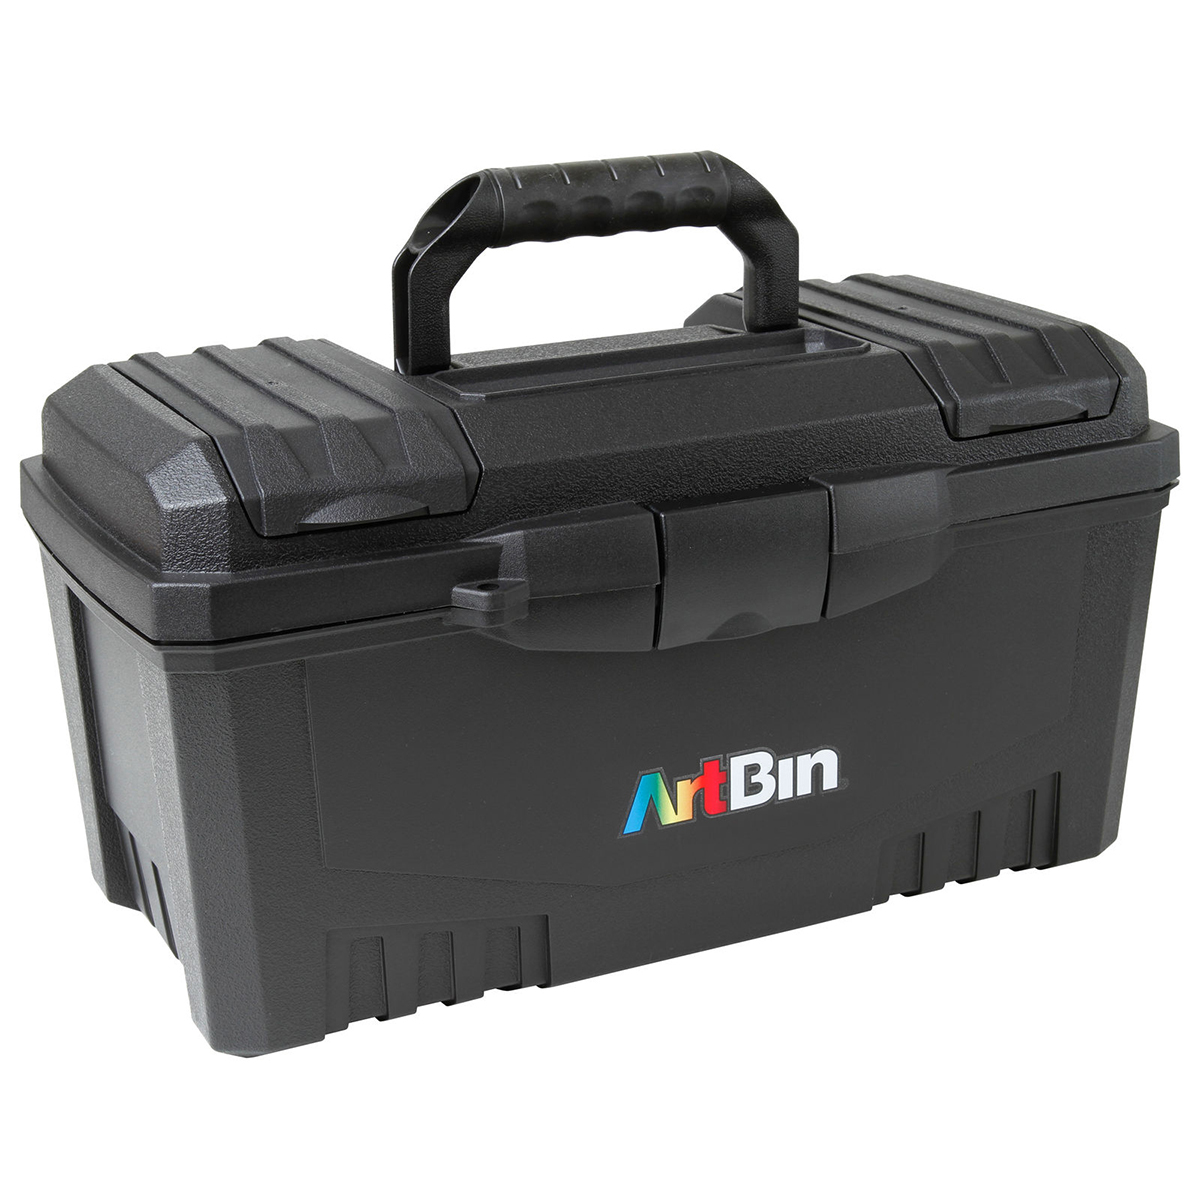 ArtBin Twin Top Storage Box with Lift-Out Tray (6918AB)